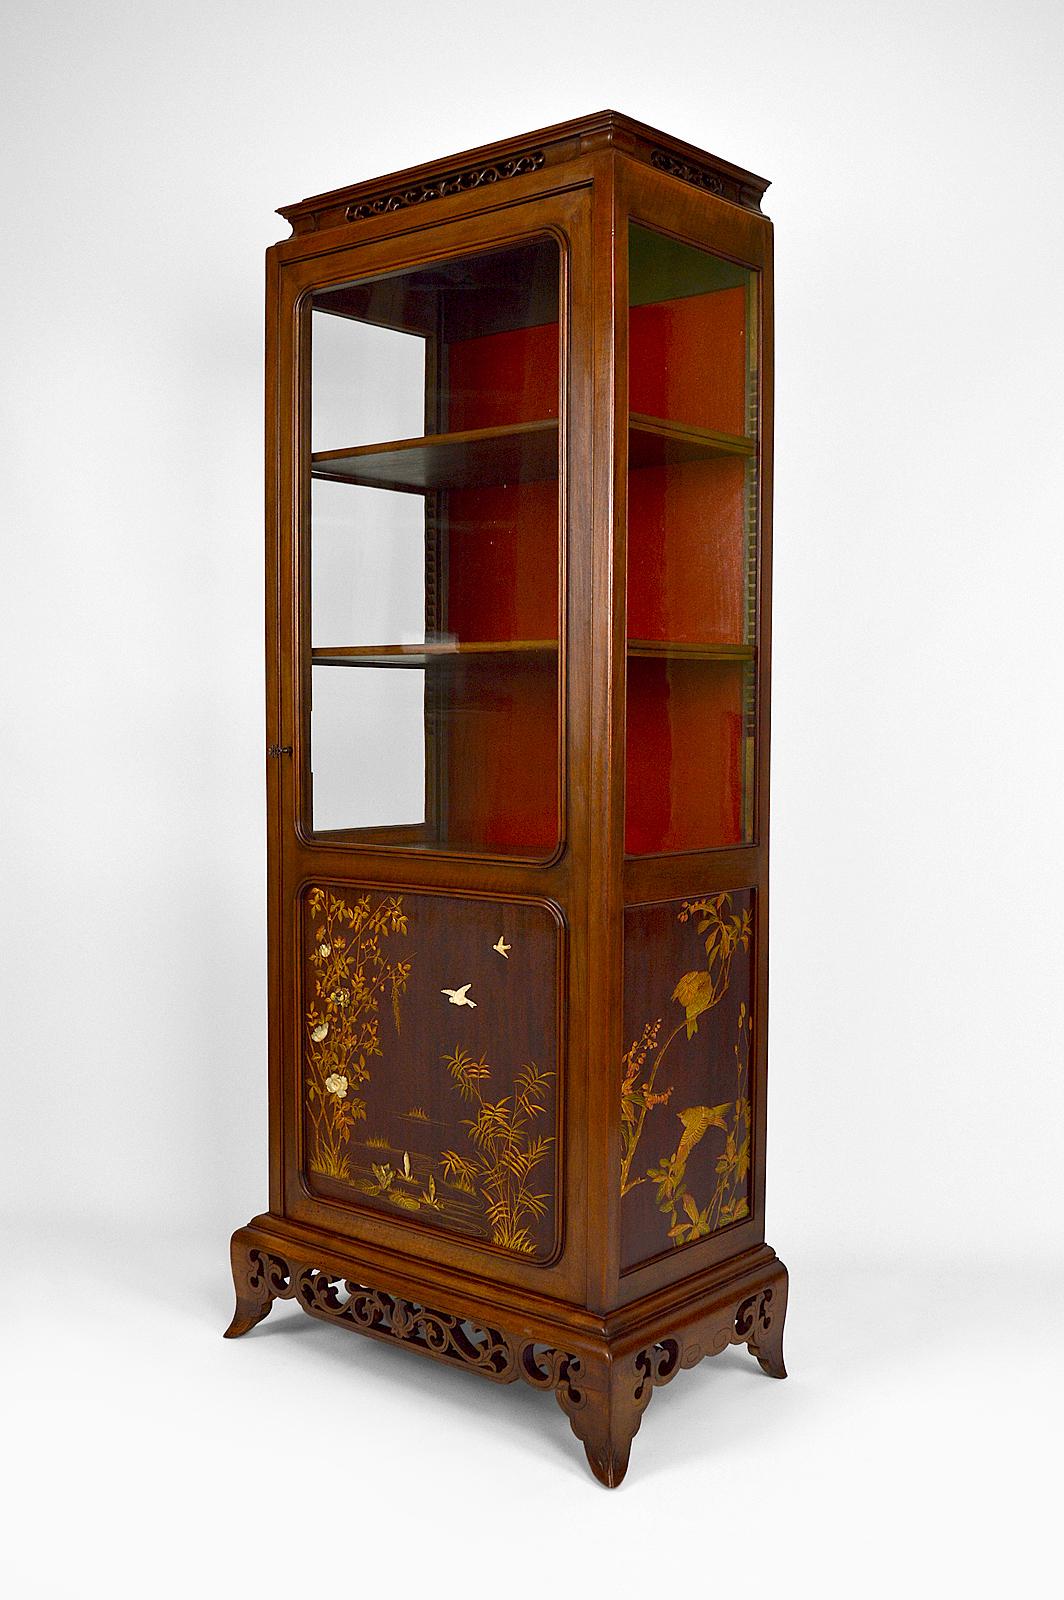 Superb walnut vitrine / showcase with 3 beautiful lacquered panels inlaid with depicting animal and plant scenes: there is a pond, flowers, foliage and various birds, cranes, waders.

The 2 shelves are modular.
The bottom of the showcase is covered